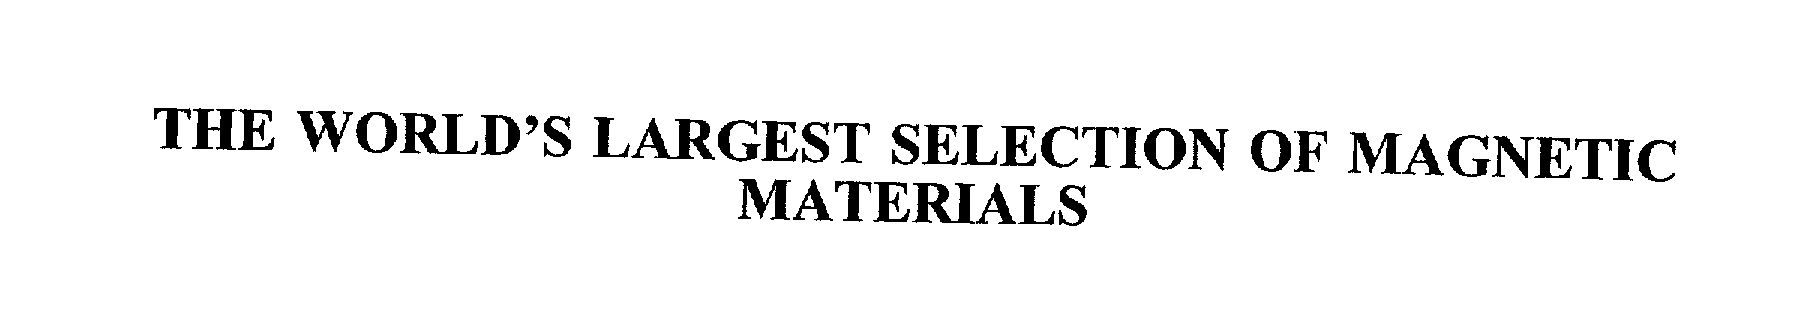  THE WORLD'S LARGEST SELECTION OF MAGNETIC MATERIALS